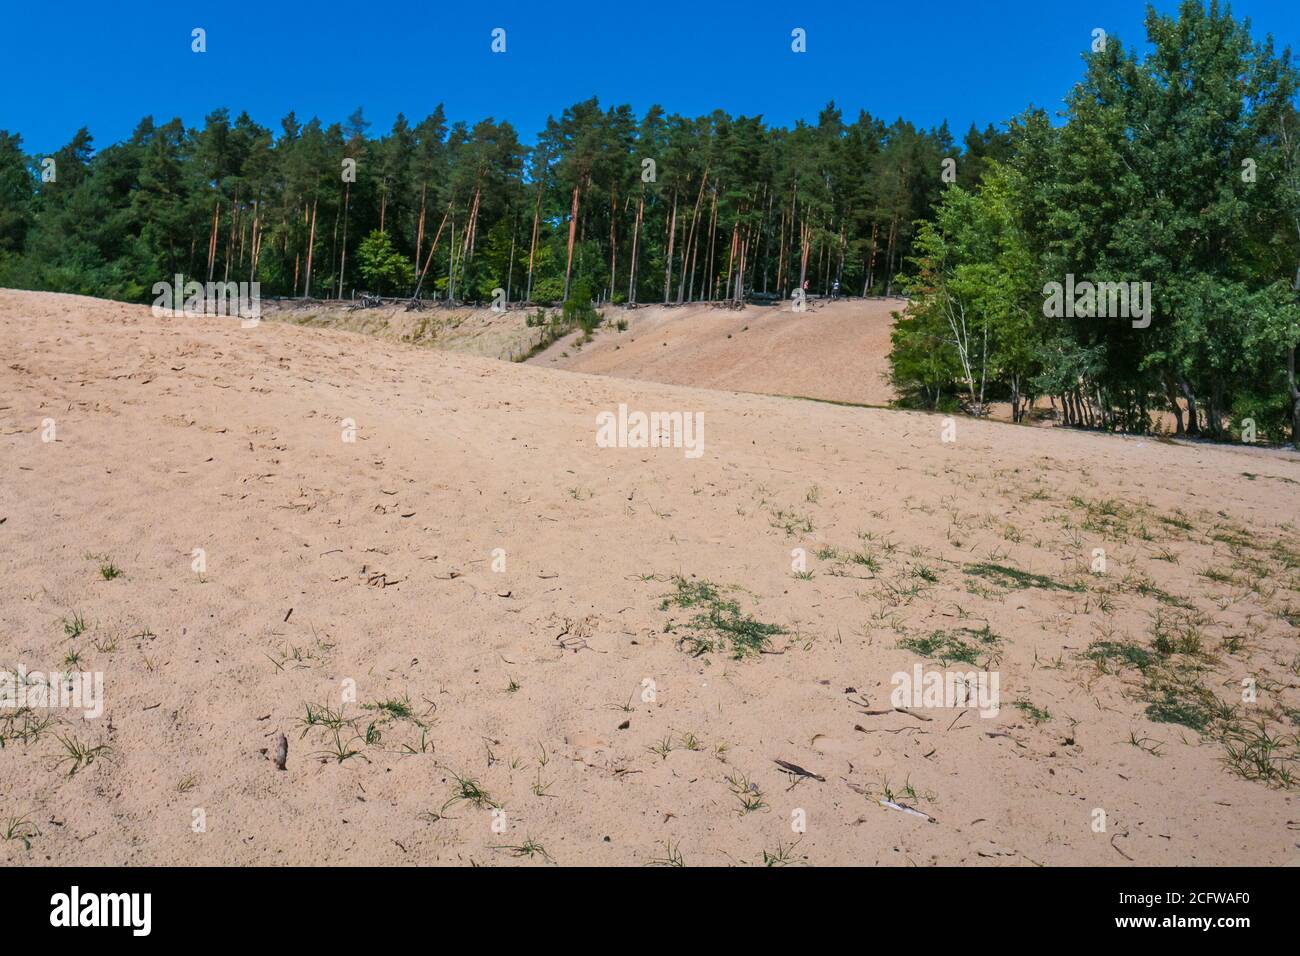 Sand dunes in the forest, a nature reserve and urban wildlife habitat. 'Im Jagen' sandpits at Grunewald forest, Berlin, Germany. Stock Photo